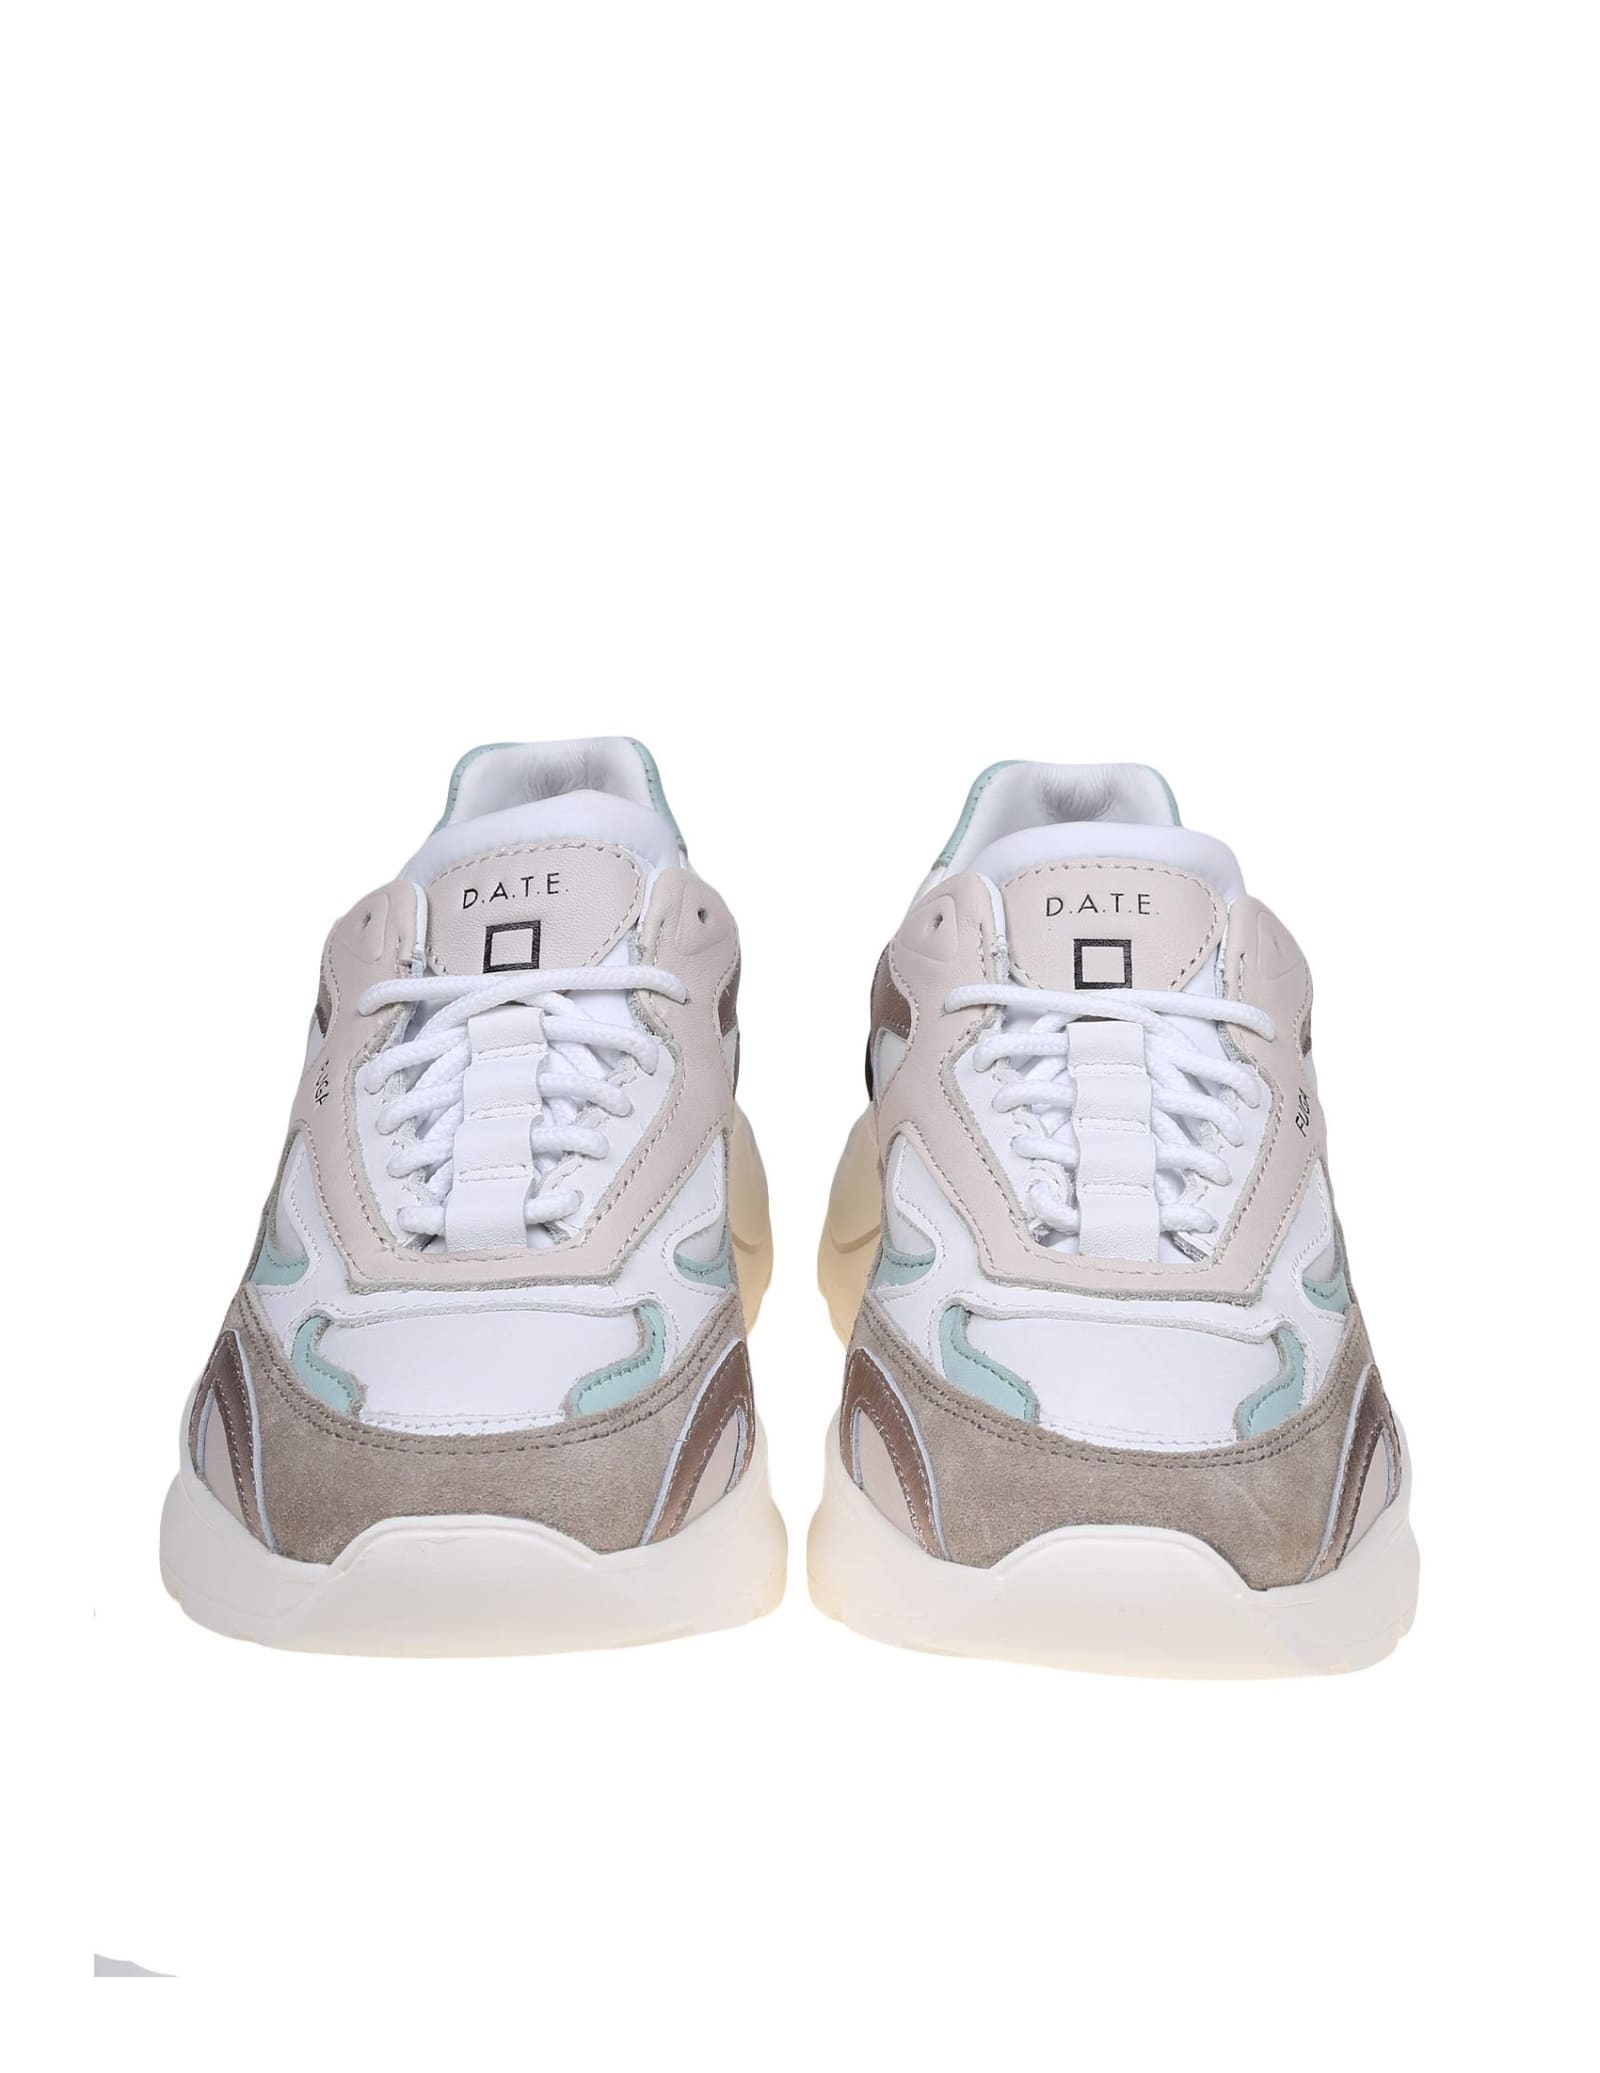 Shop Date Fuga Sneakers In White/ Cream Leather And Suede